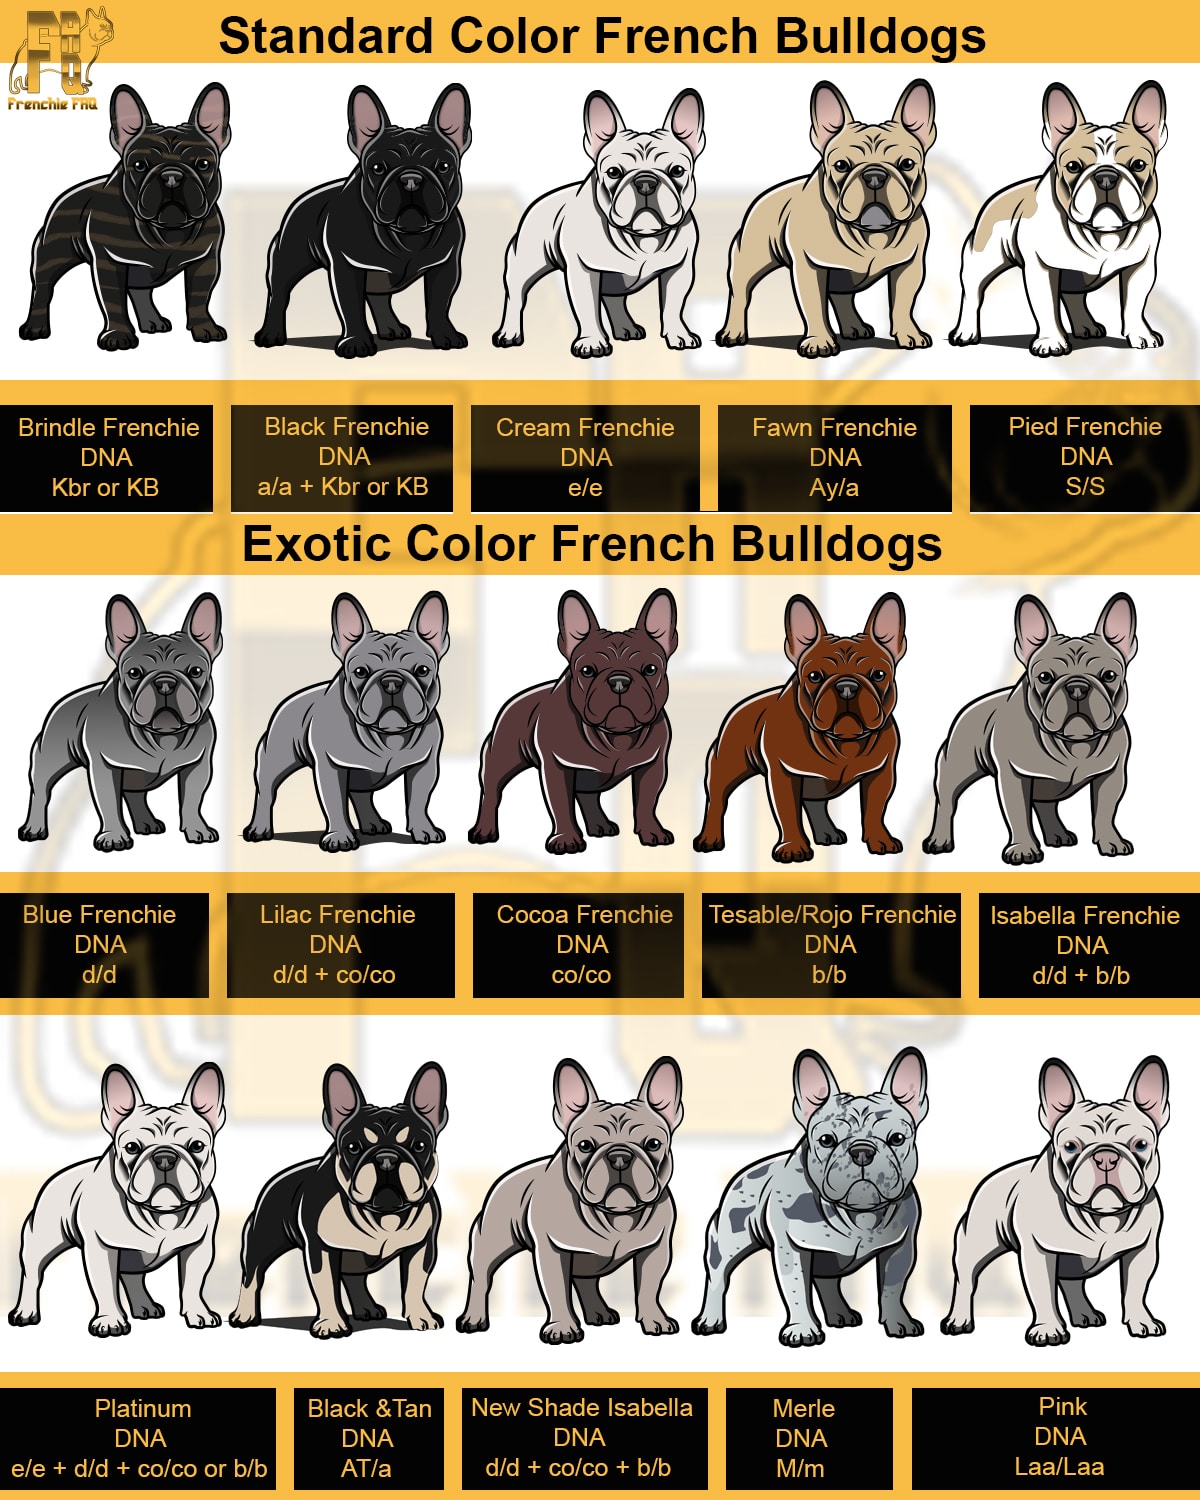 French Bulldog colors chart standard colors and rare colors for all French Bulldogs